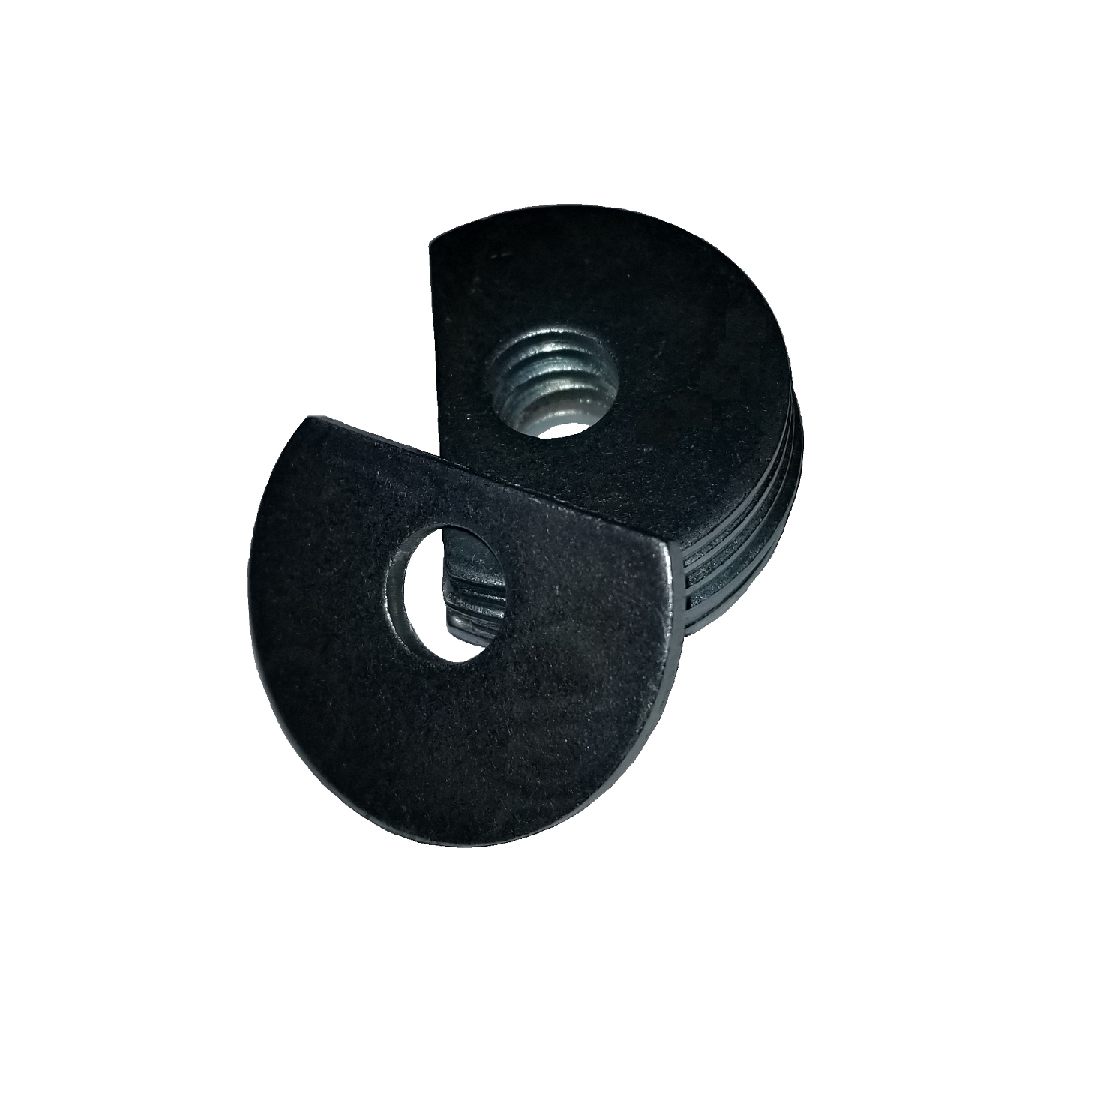 Clipped OD Washer - 1.646 ID, 3.000 OD, 0.150 Thick, Spring Steel - Hard